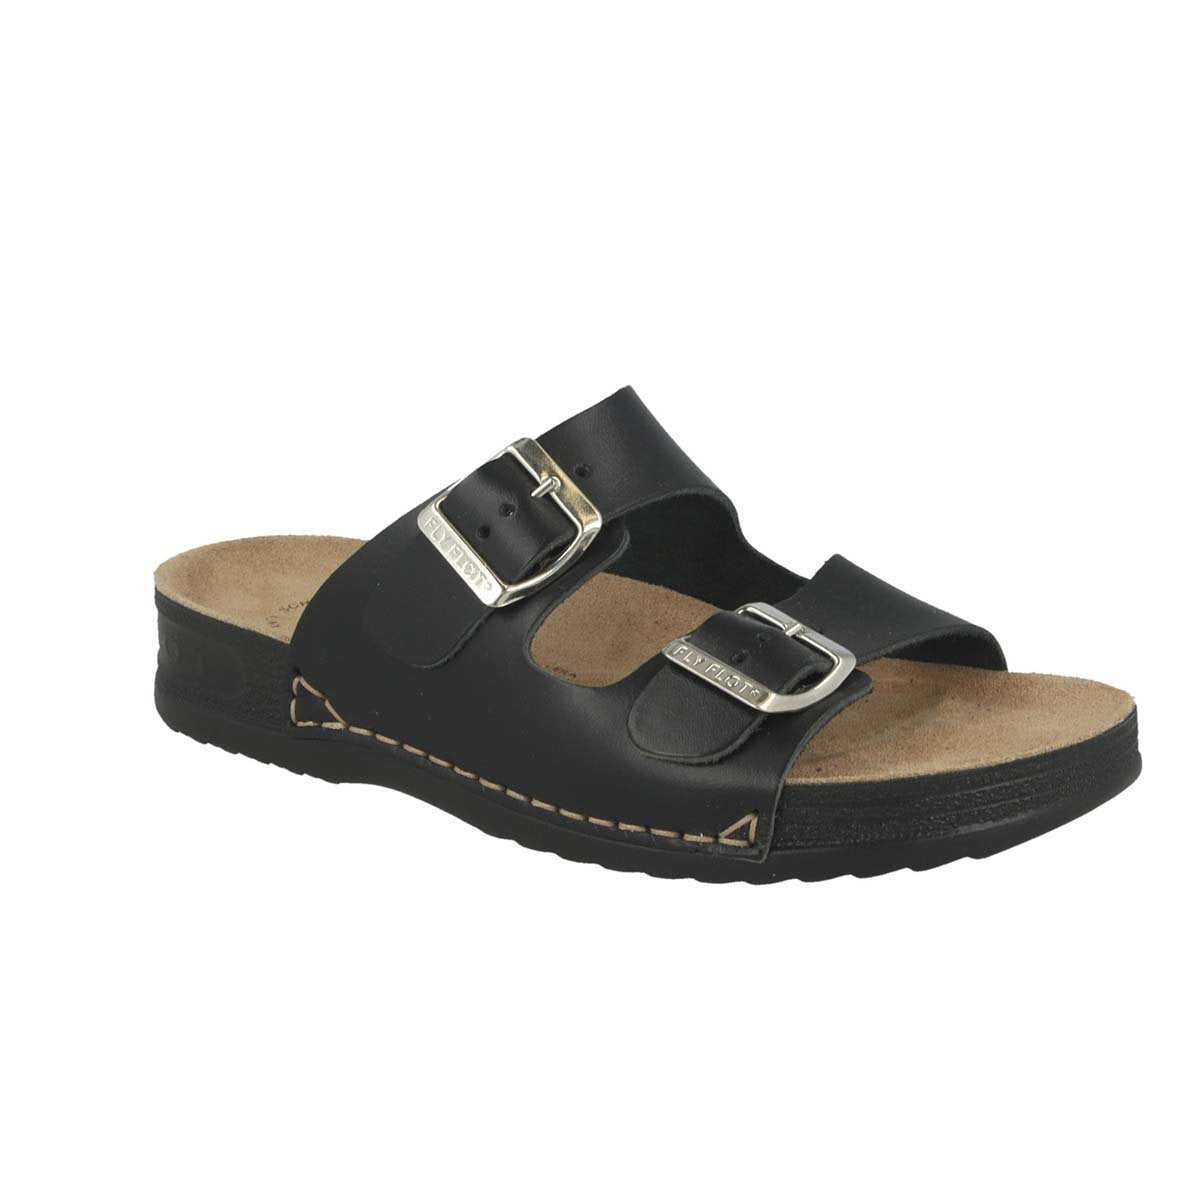 See the Classic Double Buckle Strap Slide  Sandals With Anti-Shock Cushioned Leather Insole in the colour BLACK, available in various sizes